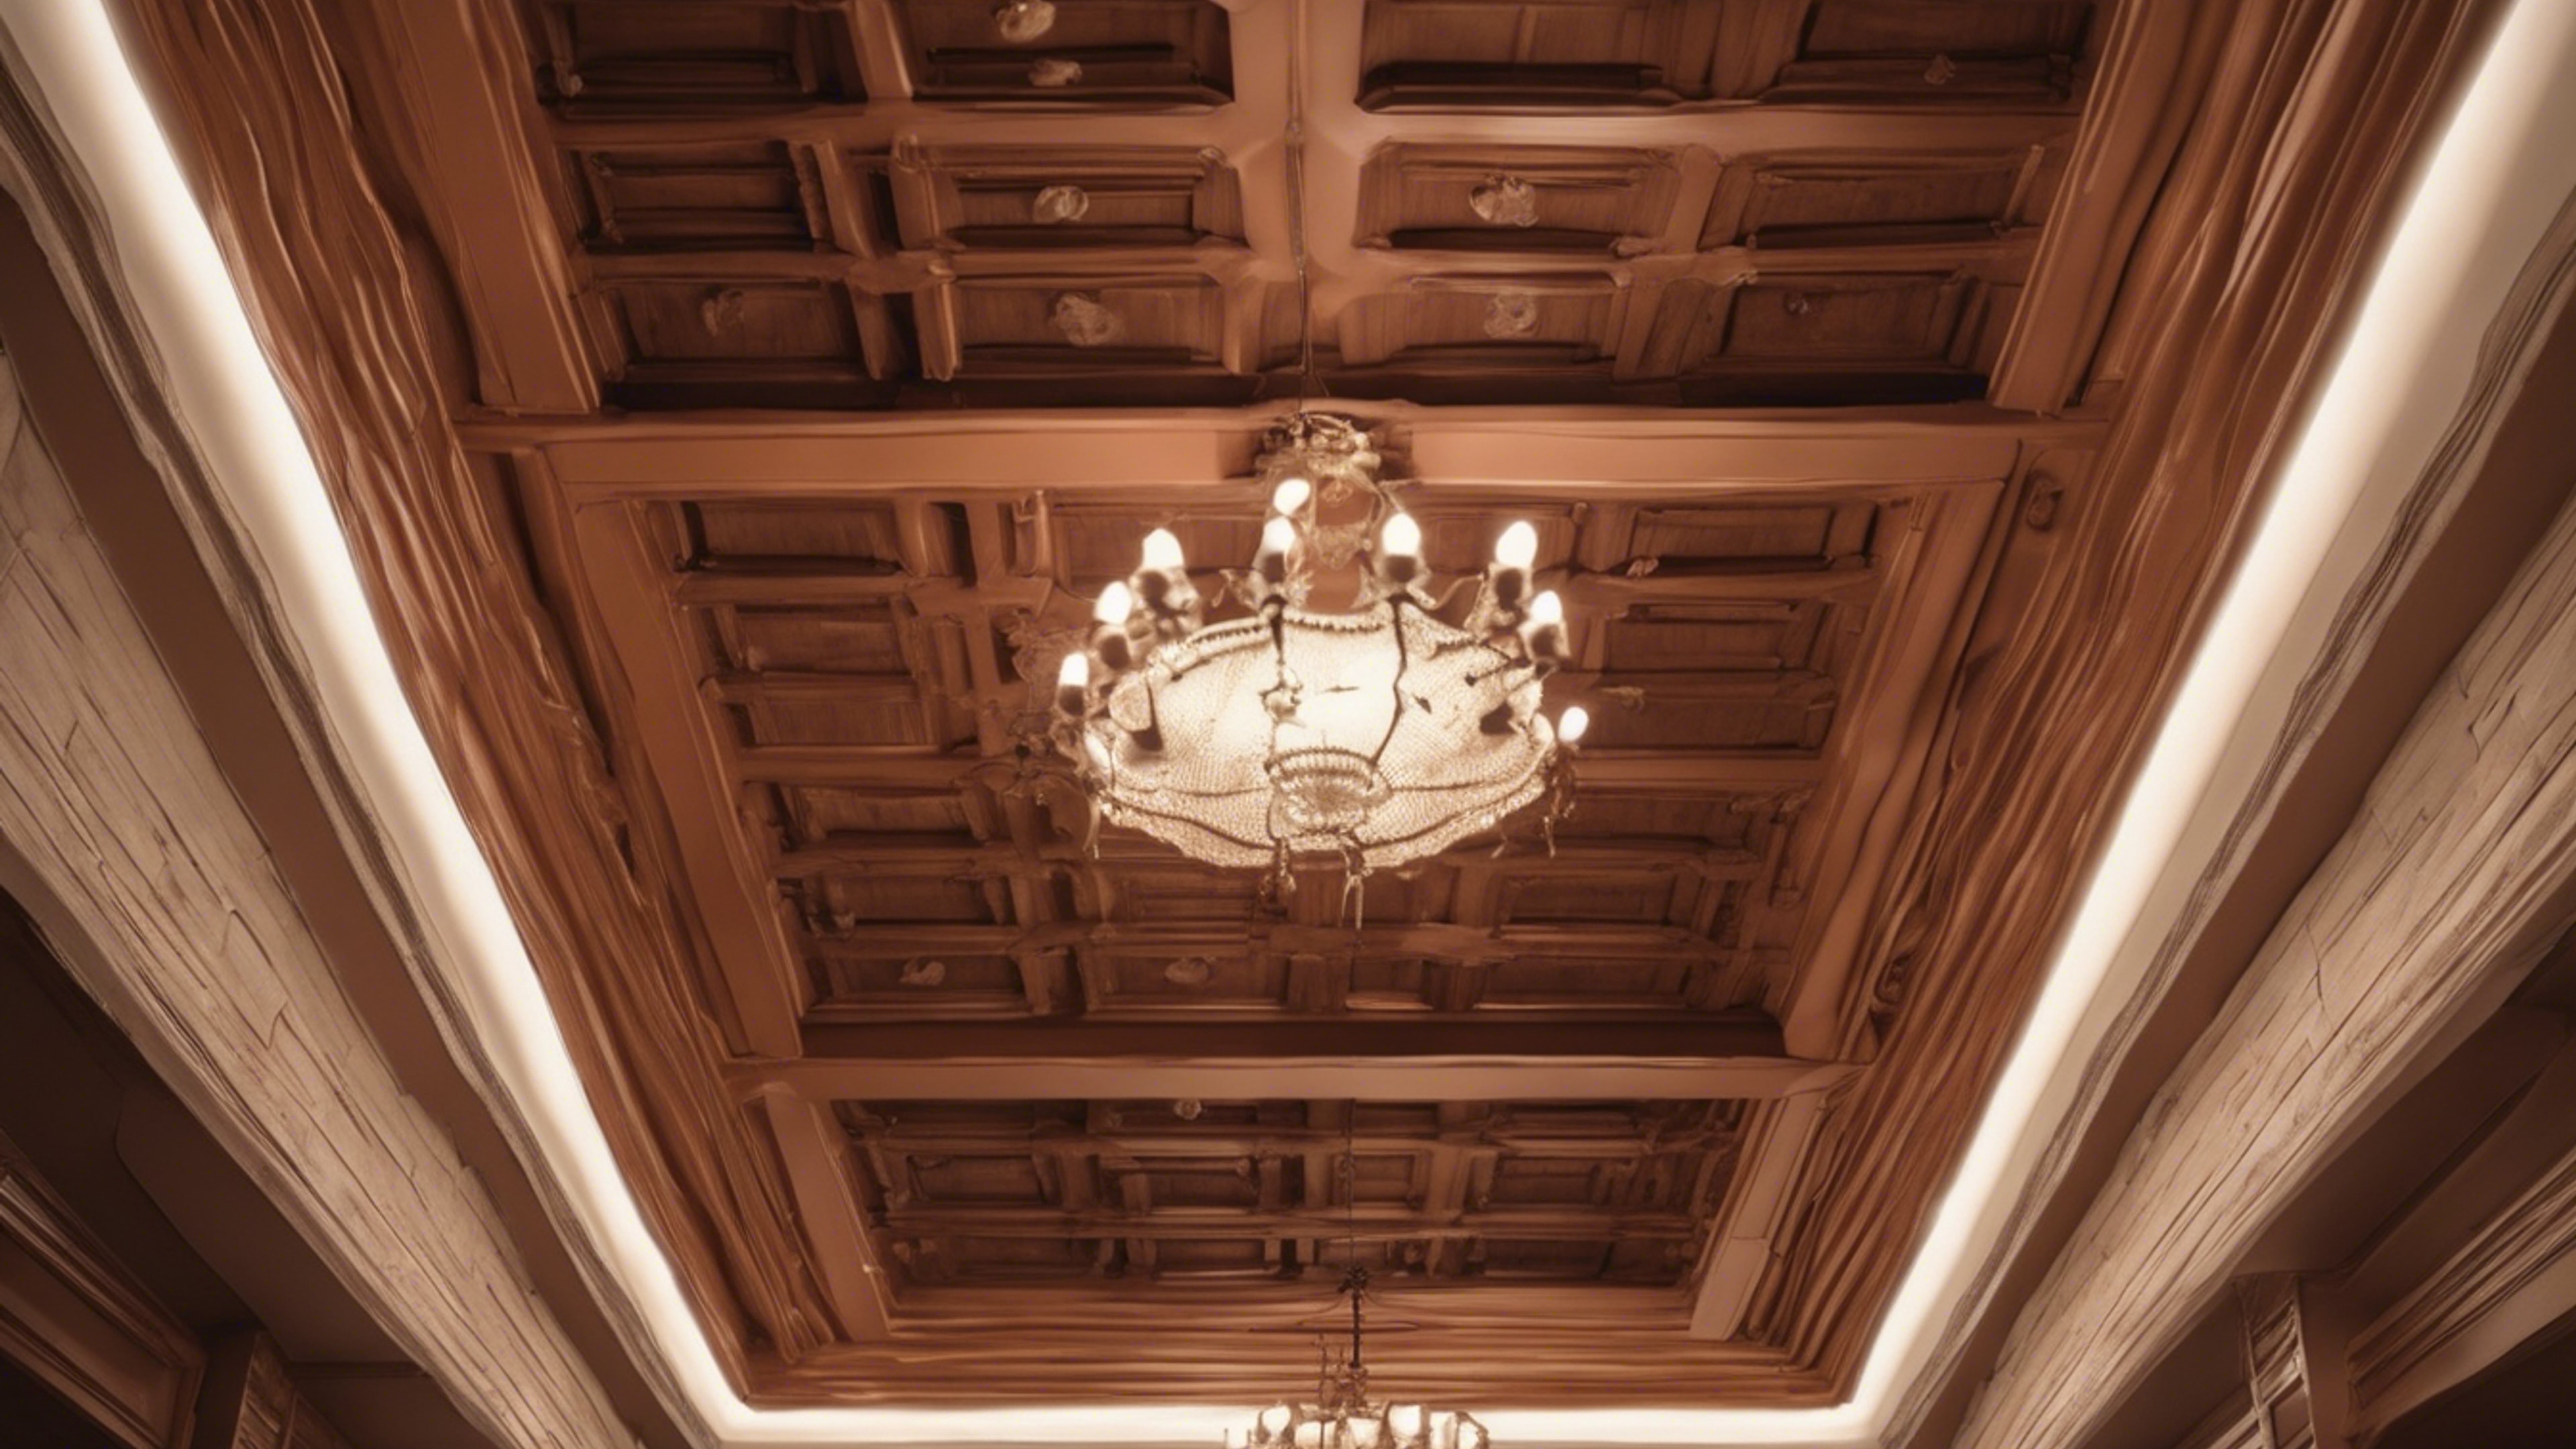 A warm brown coffered ceiling room decorated in traditional style Tapet[0b856da927b2485ba9d5]